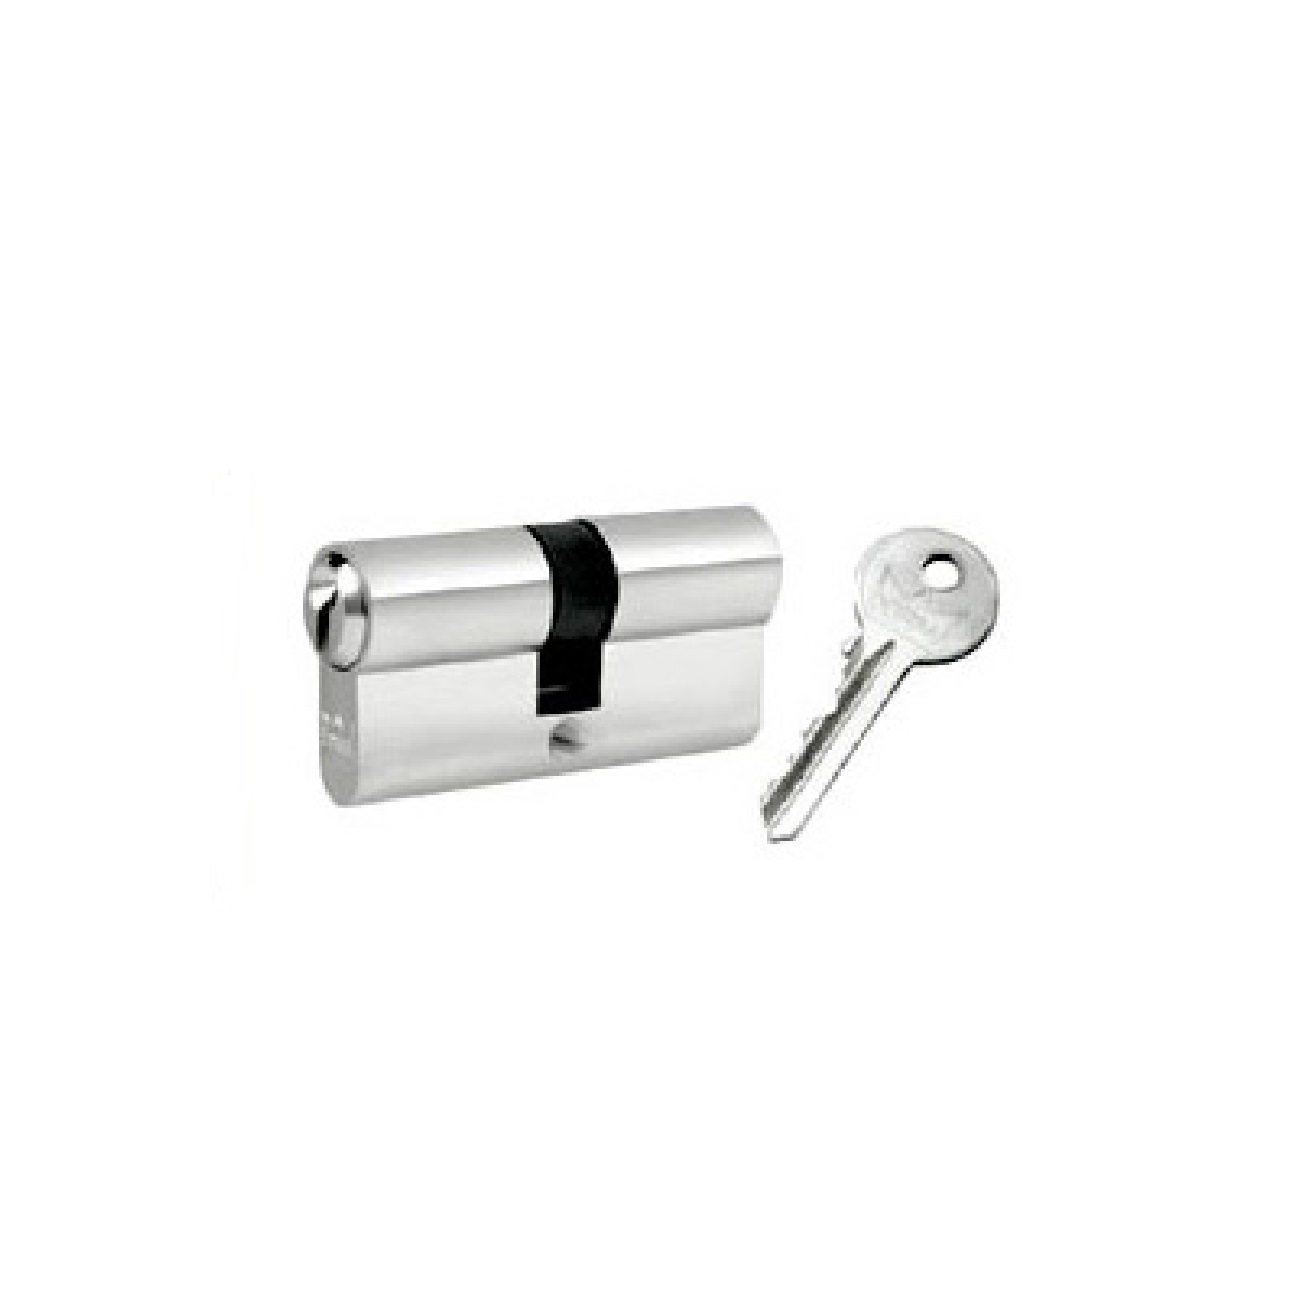 Dorma PC73 Entrance Double Cylinder Lock 73MM